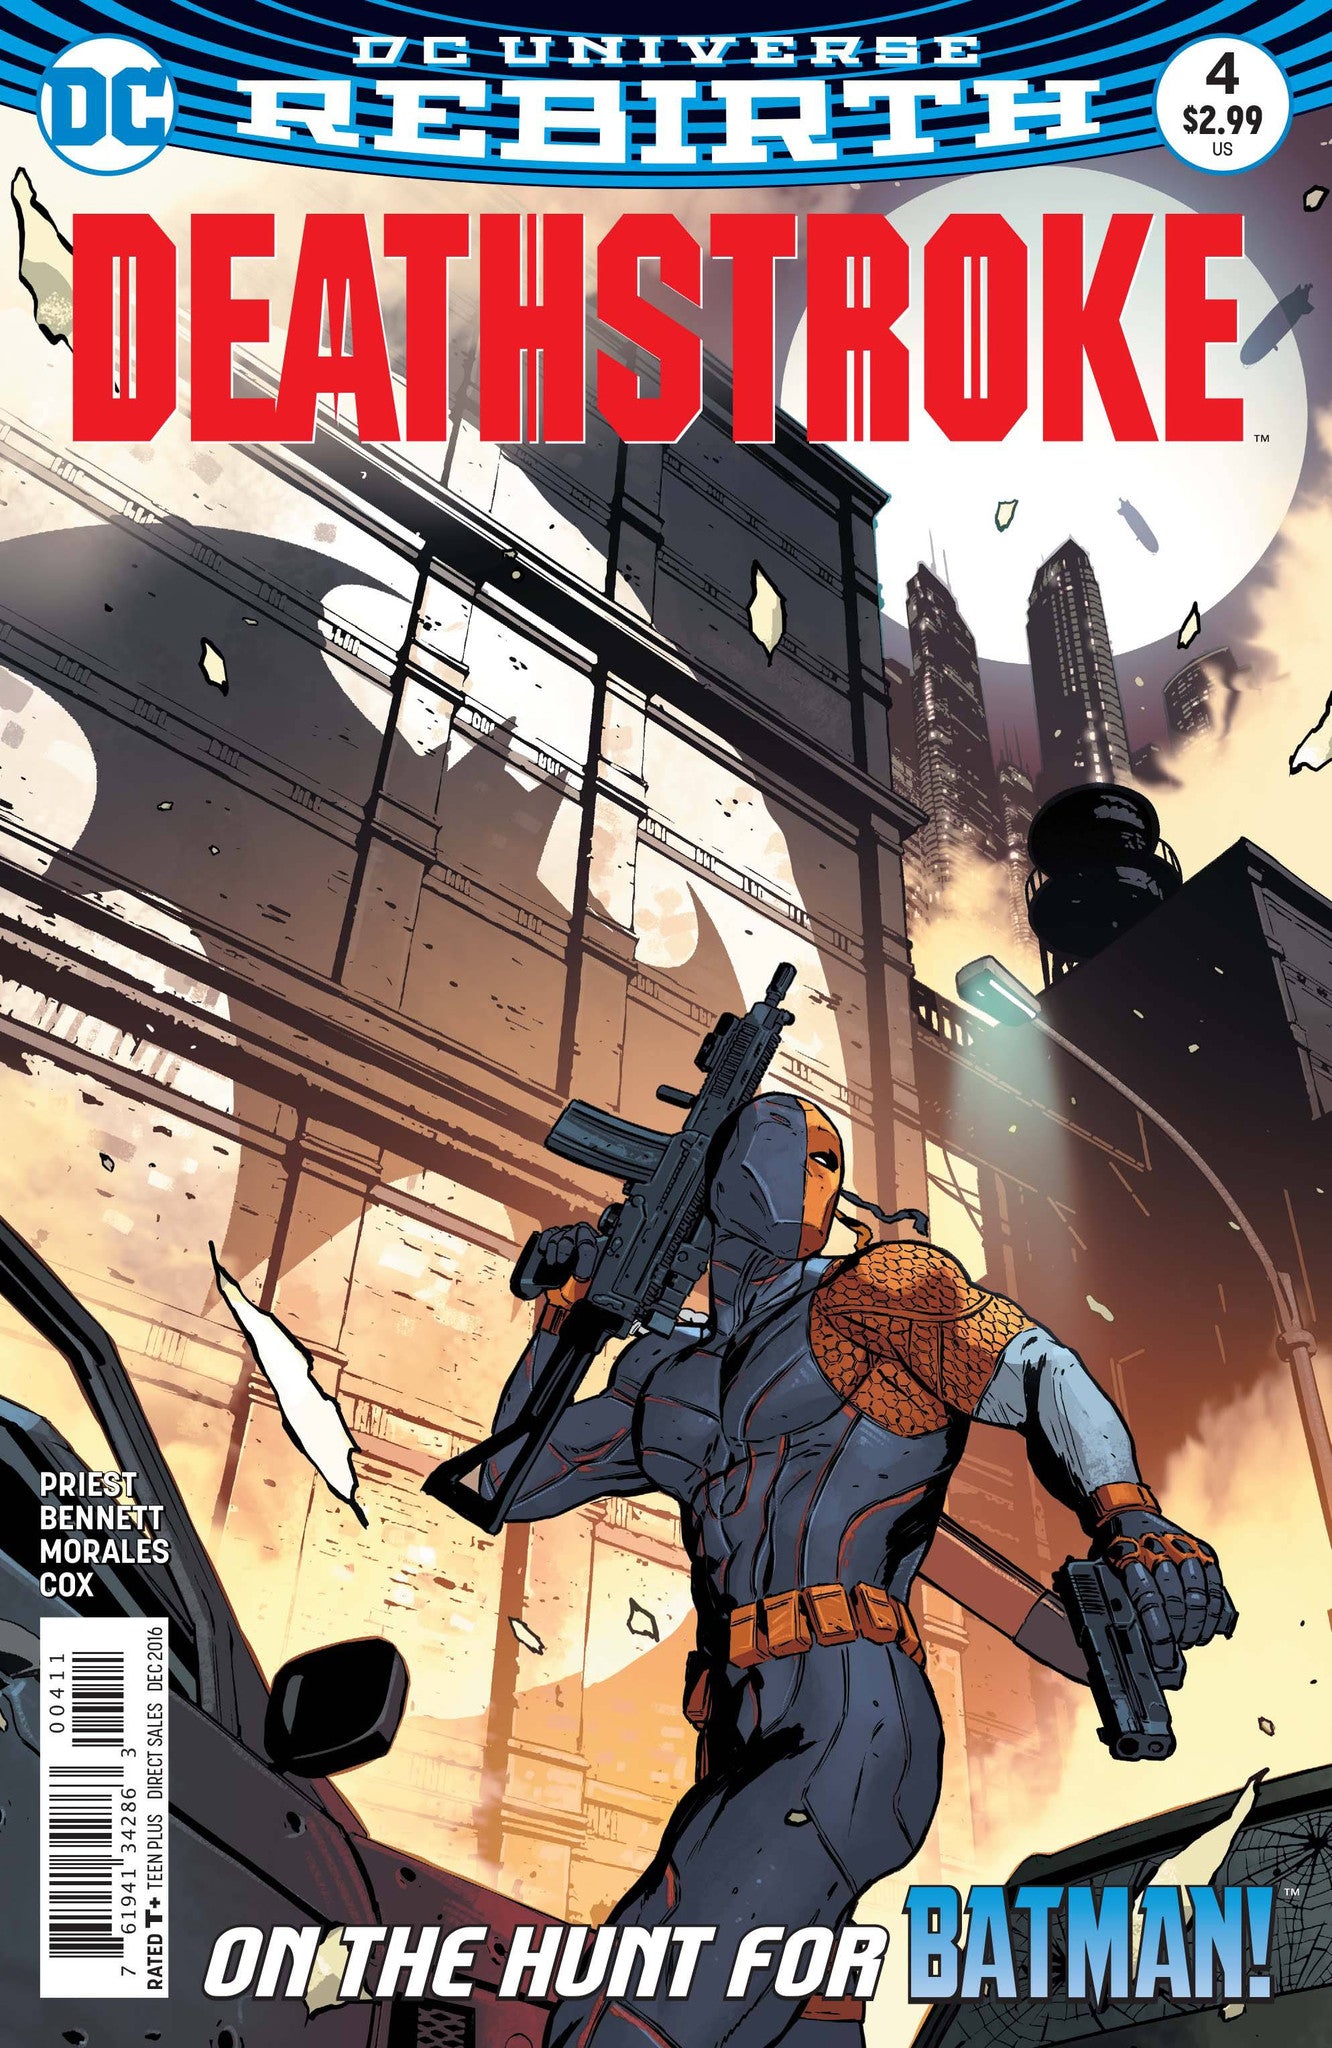 DEATHSTROKE #4 COVER